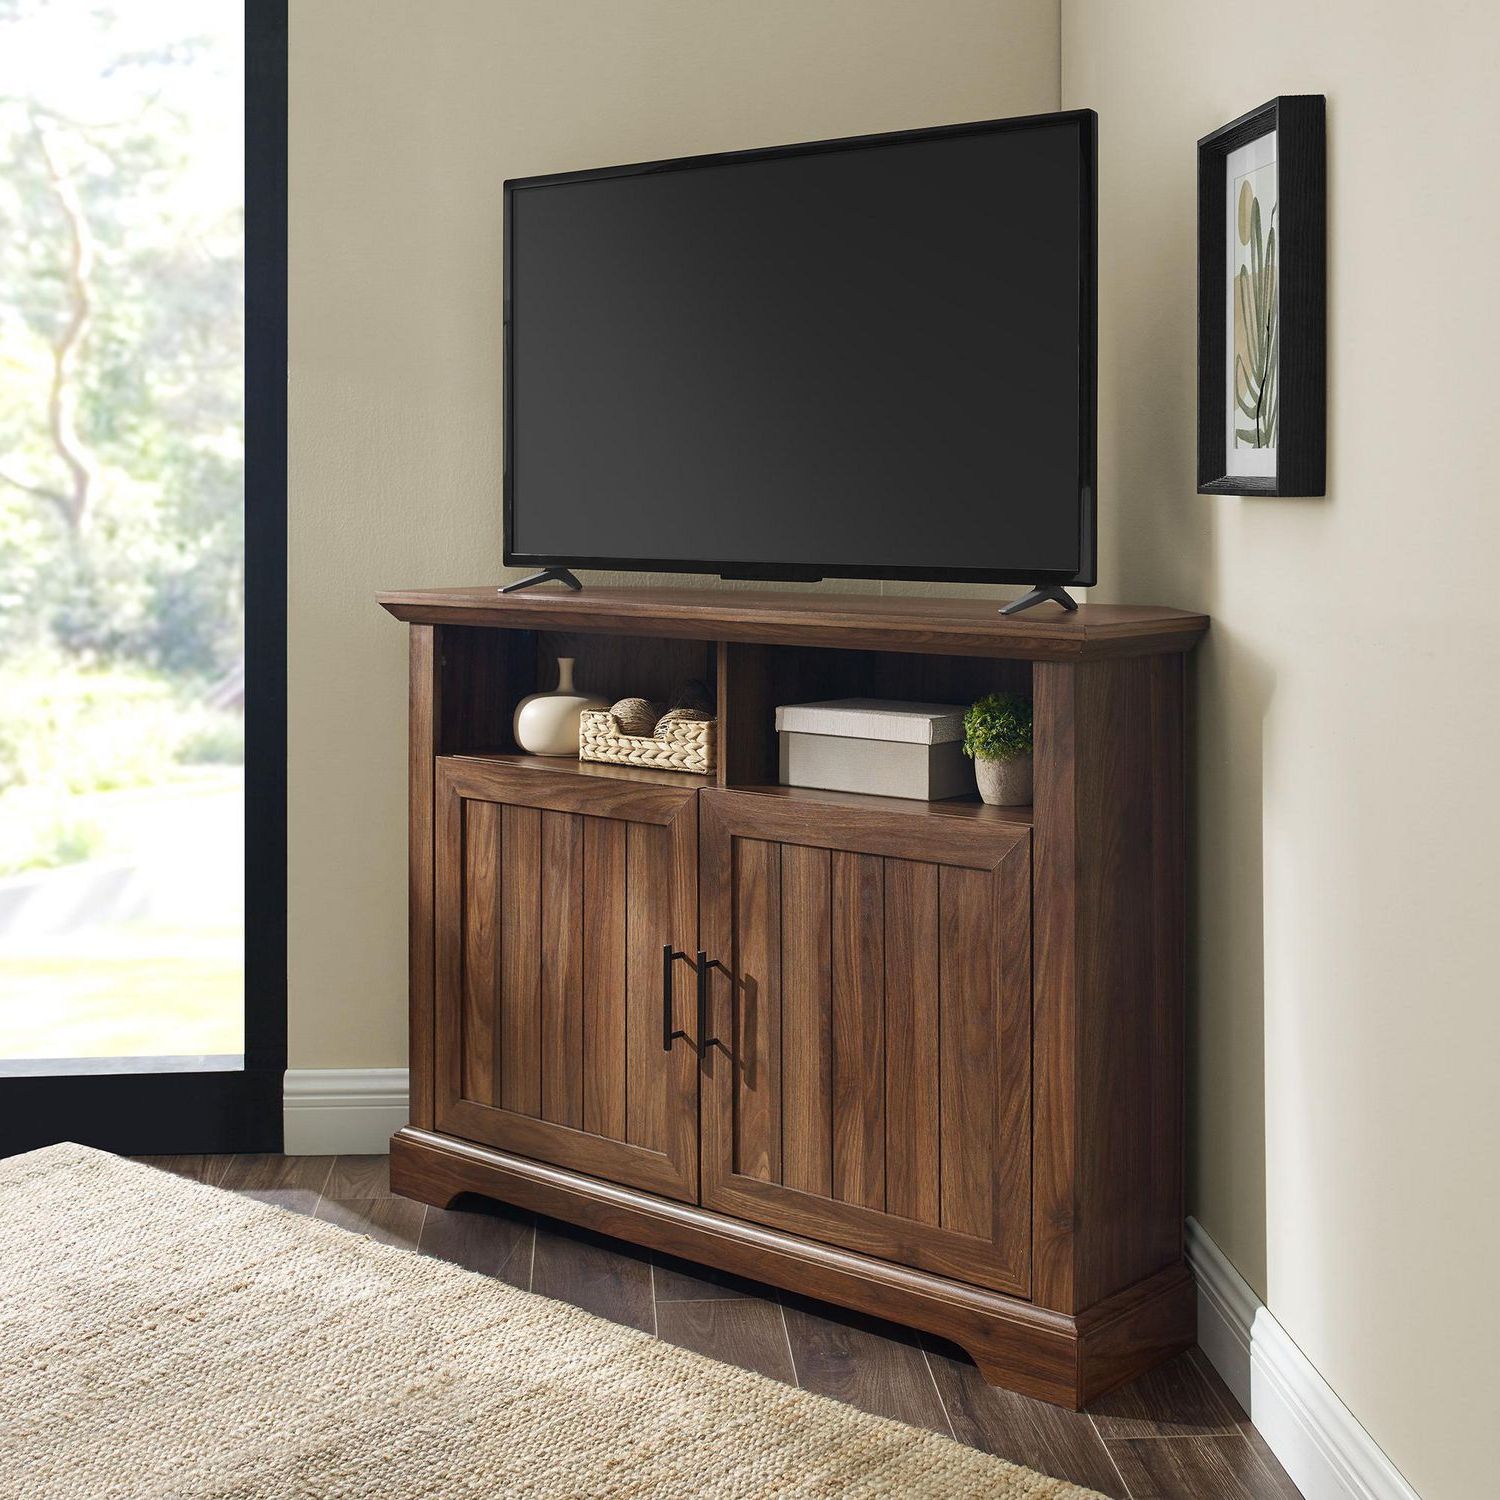 2018 Lionel Corner Tv Stands For Tvs Up To 48" Intended For Modern Farmhouse Grooved Door Corner Tv Console For Tv's (View 6 of 10)